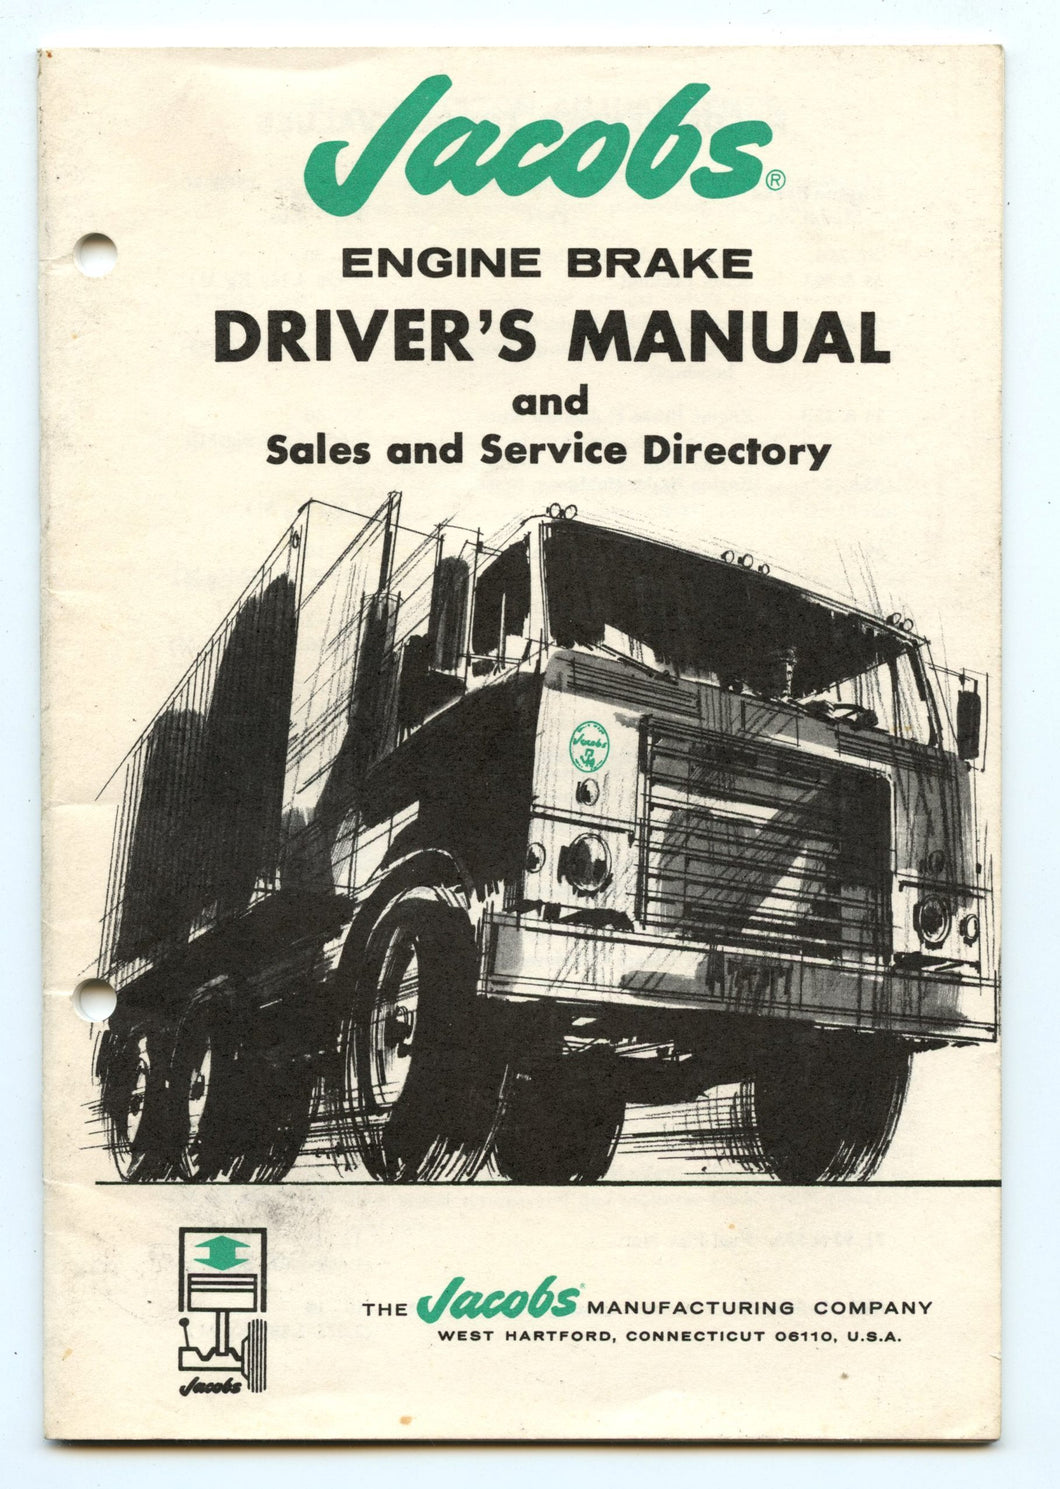 Jacobs Engine Brake Driver's Manual and Sales and Service Directory